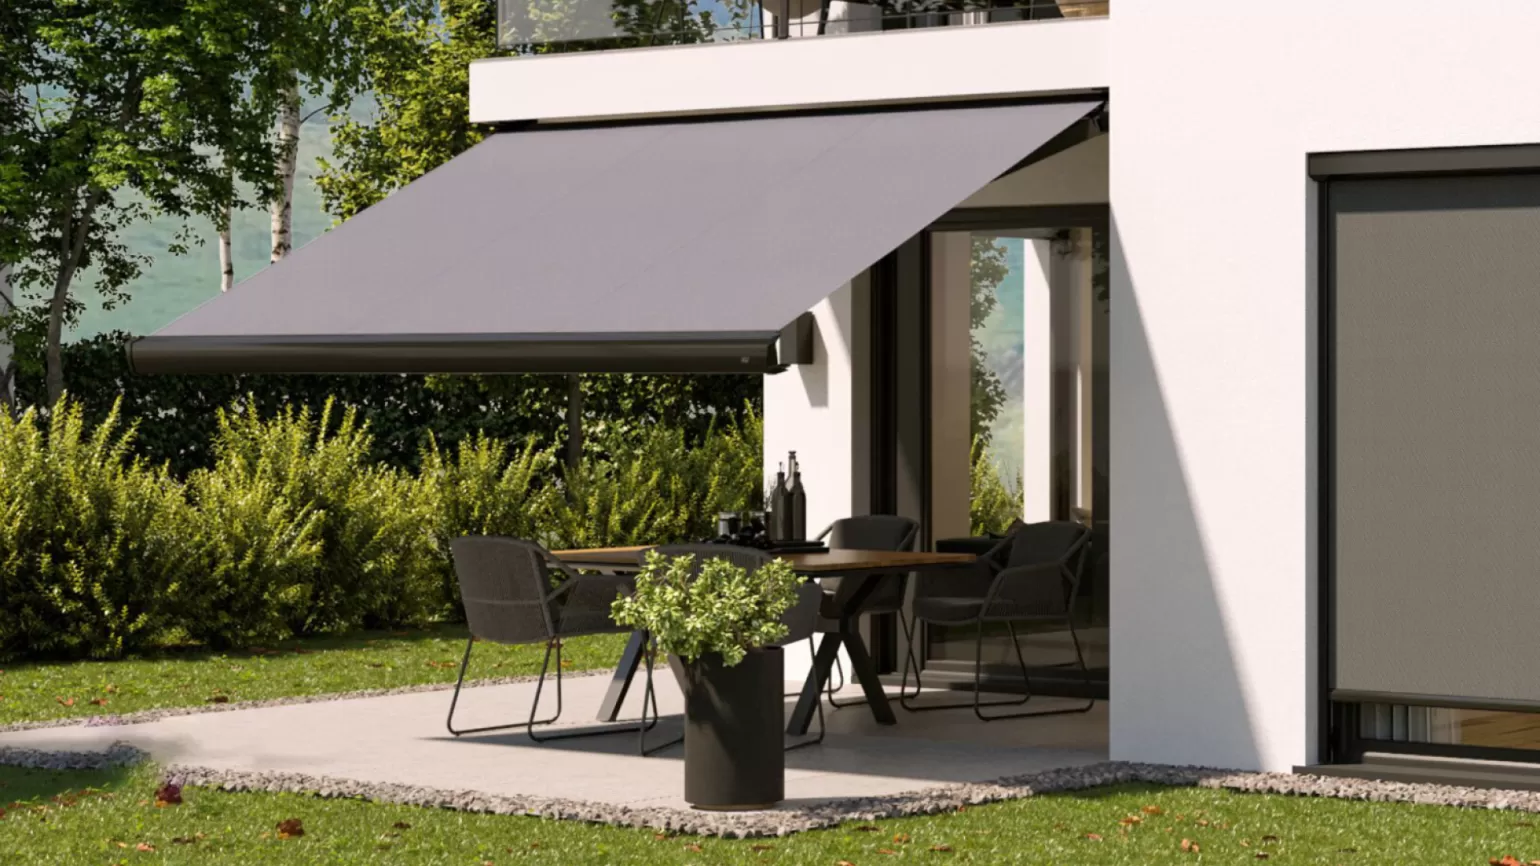 When contemplating home improvements, the question of value inevitably arises. However, a retractable Awning for your patio or garden presents numerous benefits that may not immediately come to mind:

1. Expanding Outdoor Space: Enhance your outdoor living area by seamlessly extending it with a retractable Awning.

2. Shade and Protection: Enjoy shelter from both sun and rain, enhancing your outdoor experience regardless of weather conditions.

3. Motorised Convenience: Experience effortless control with automatic motorised systems, adding convenience to your outdoor lifestyle.

4. Enhanced Comfort: Built-in lighting and heating options provide additional comfort, ensuring your outdoor space remains enjoyable throughout the day and evening.

5. Cooling Effect: By blocking direct sunlight, retractable systems naturally help to cool your home, reducing indoor temperatures during warmer months.

Considering these advantages, a retractable Awning proves to be a valuable addition to your home, offering both practical benefits and enhanced comfort for outdoor living.
